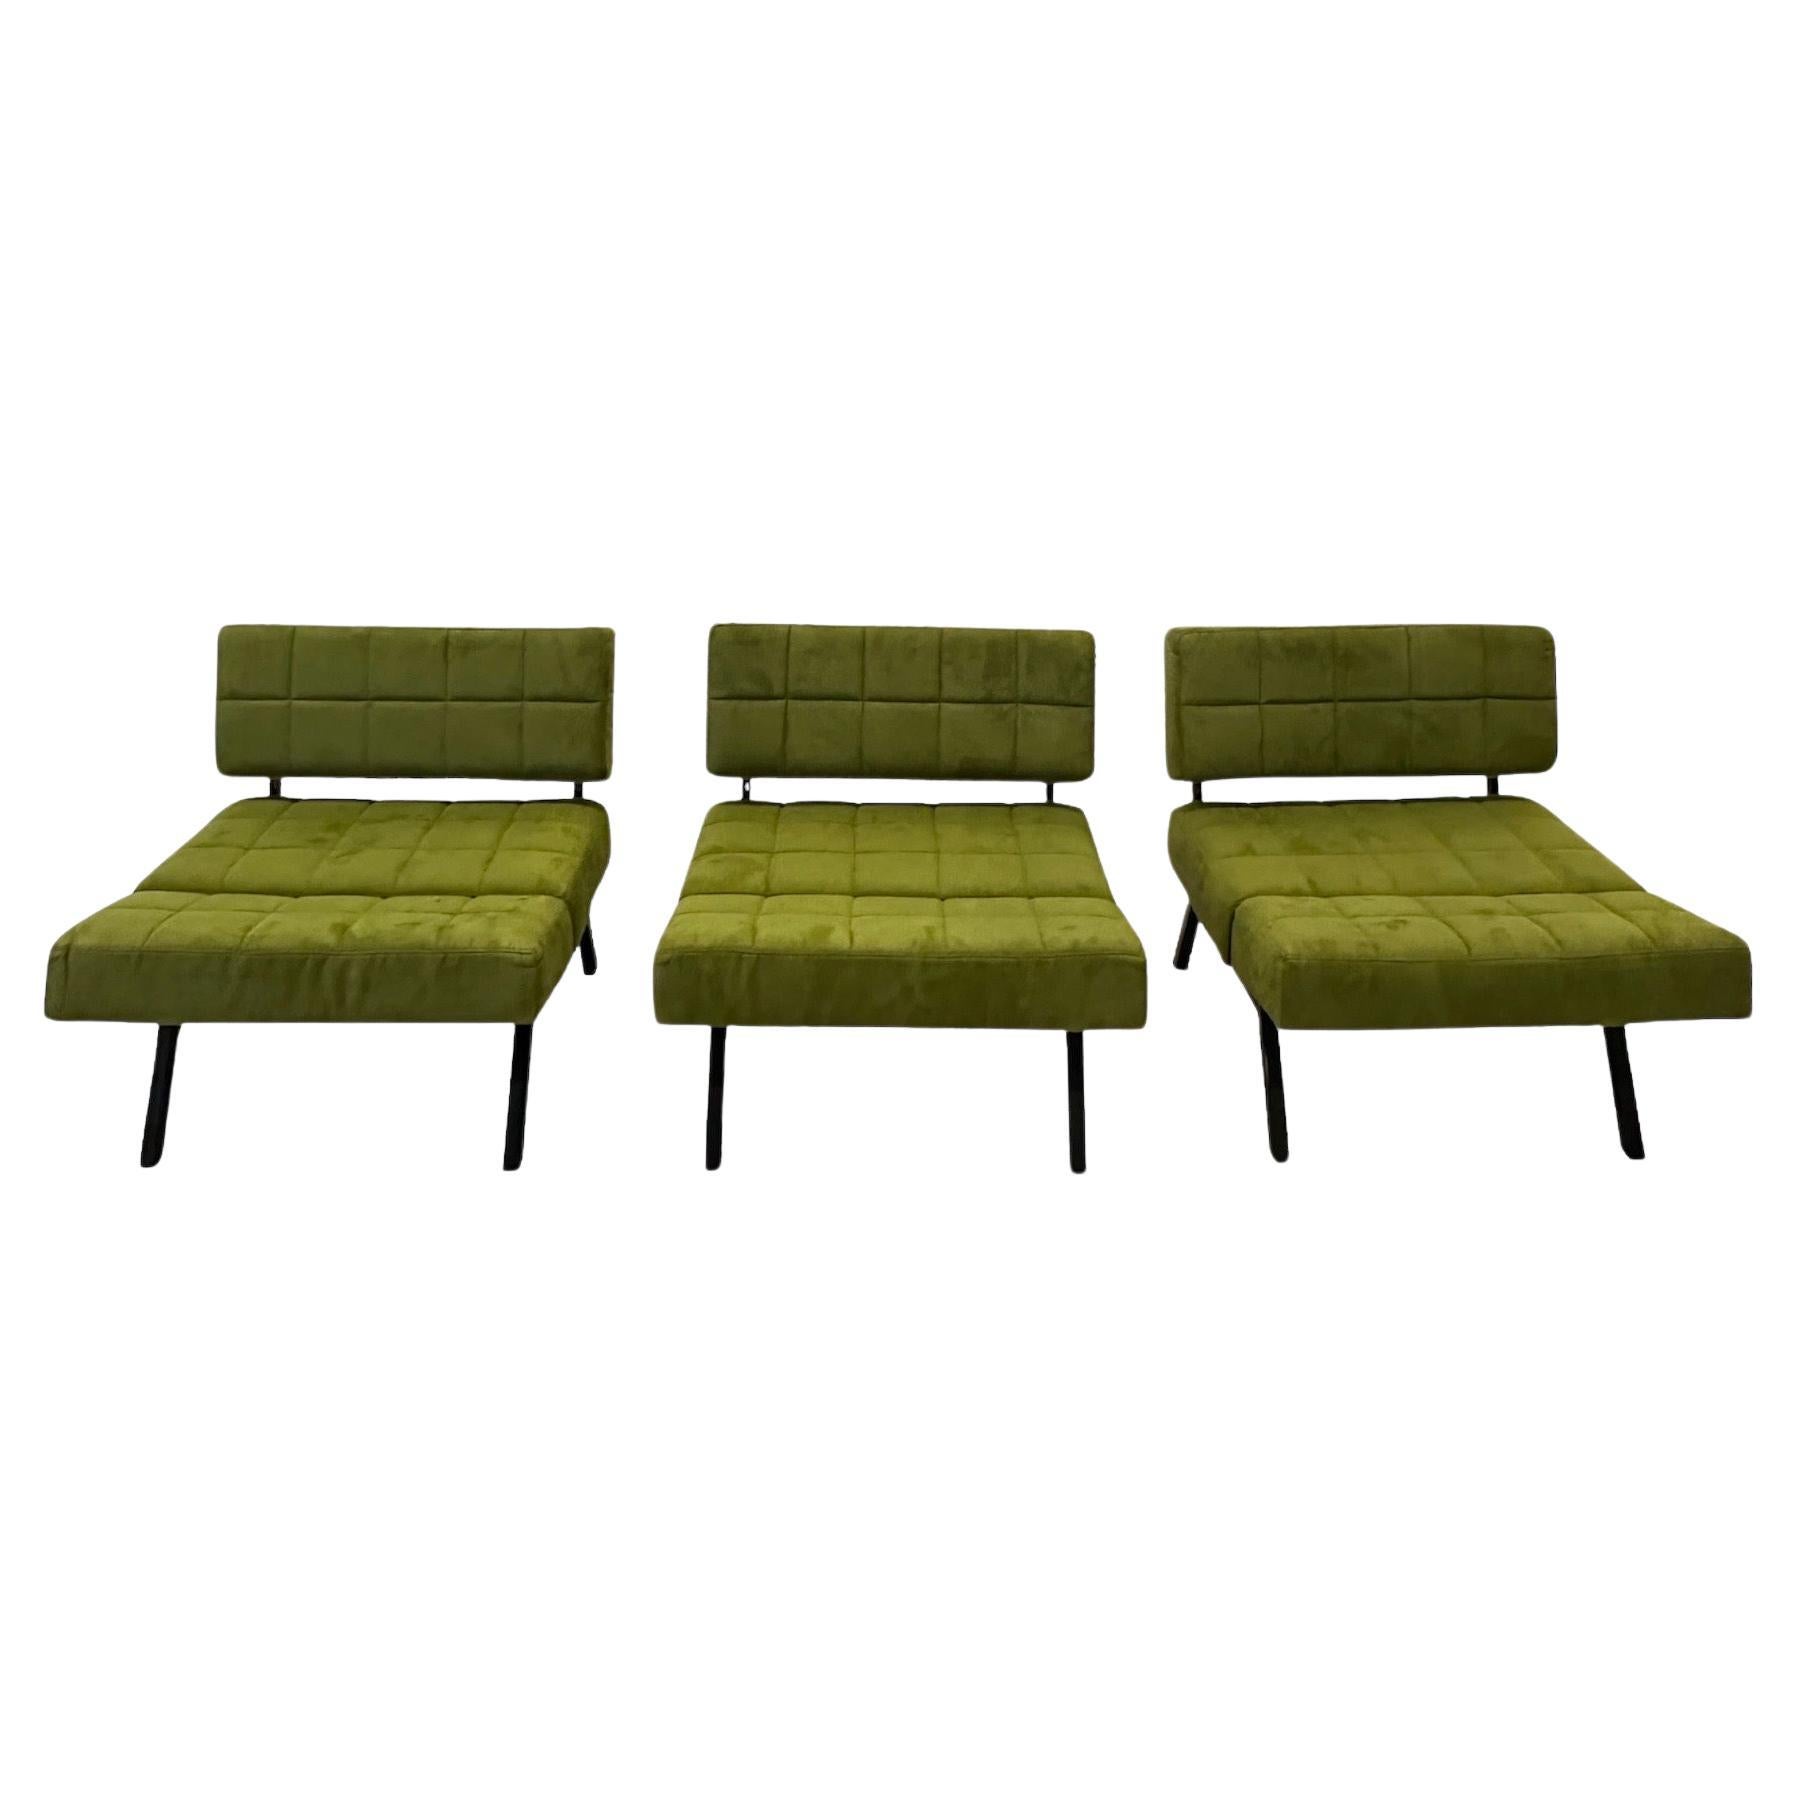 Set of 3 of ‘Panchetto’ Reclining Chairs by Rito Valla for IPE, Italy 1960s